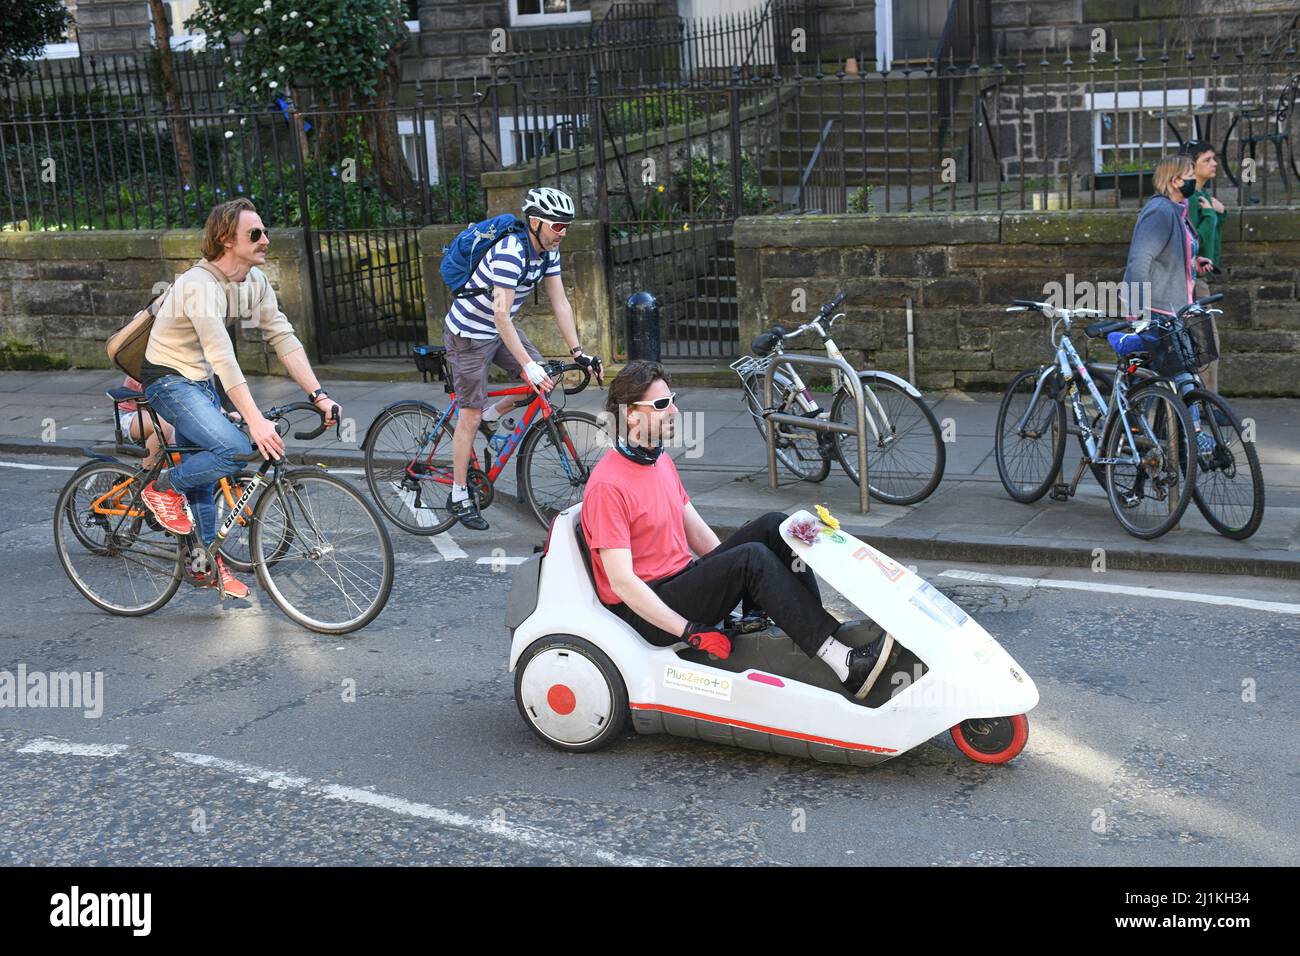 Edinburgh Scotland, UK March 26 2022. Edinburgh Critical Mass Cycle, Stockbridge Saunter, takes place through the city with hundreds taking part as society transitions from cars to more sustainable forms of transport.  credit sst/alamy live news Stock Photo